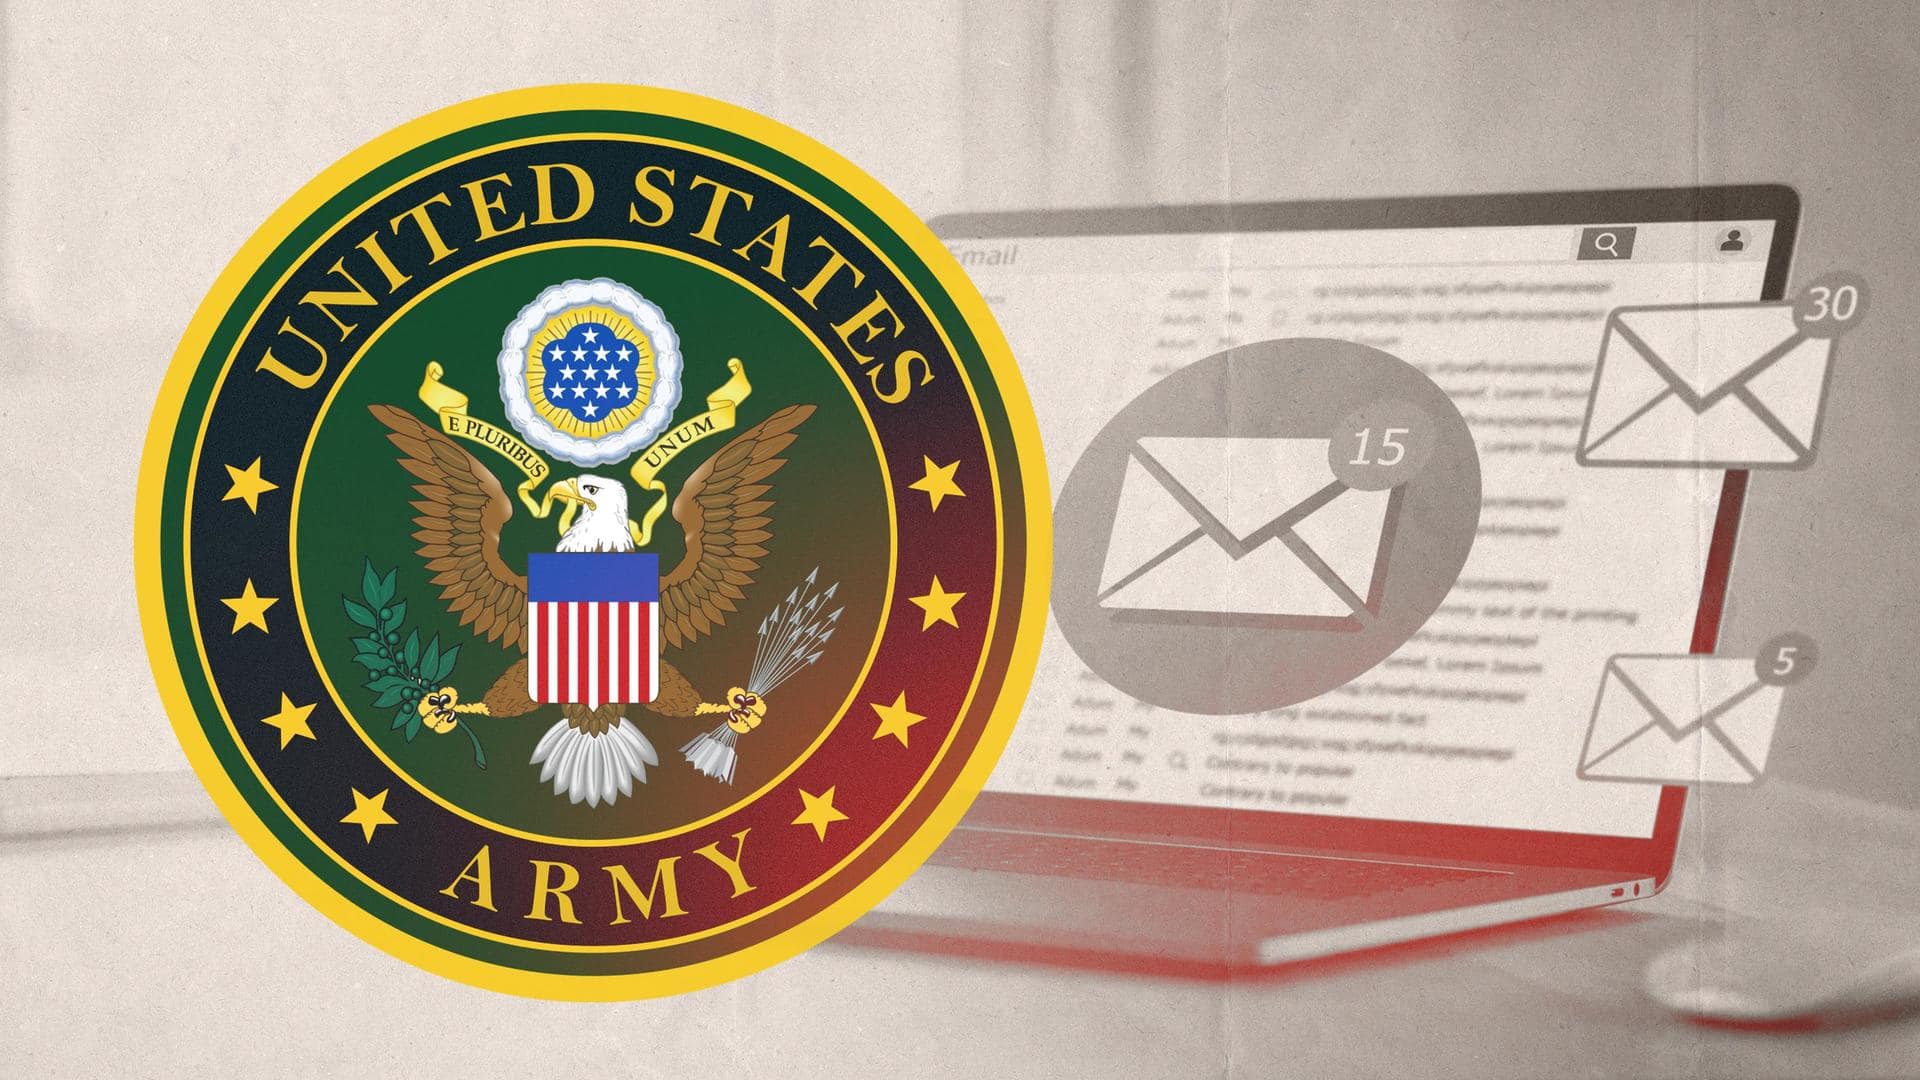 How this email typo put US military secrets at risk